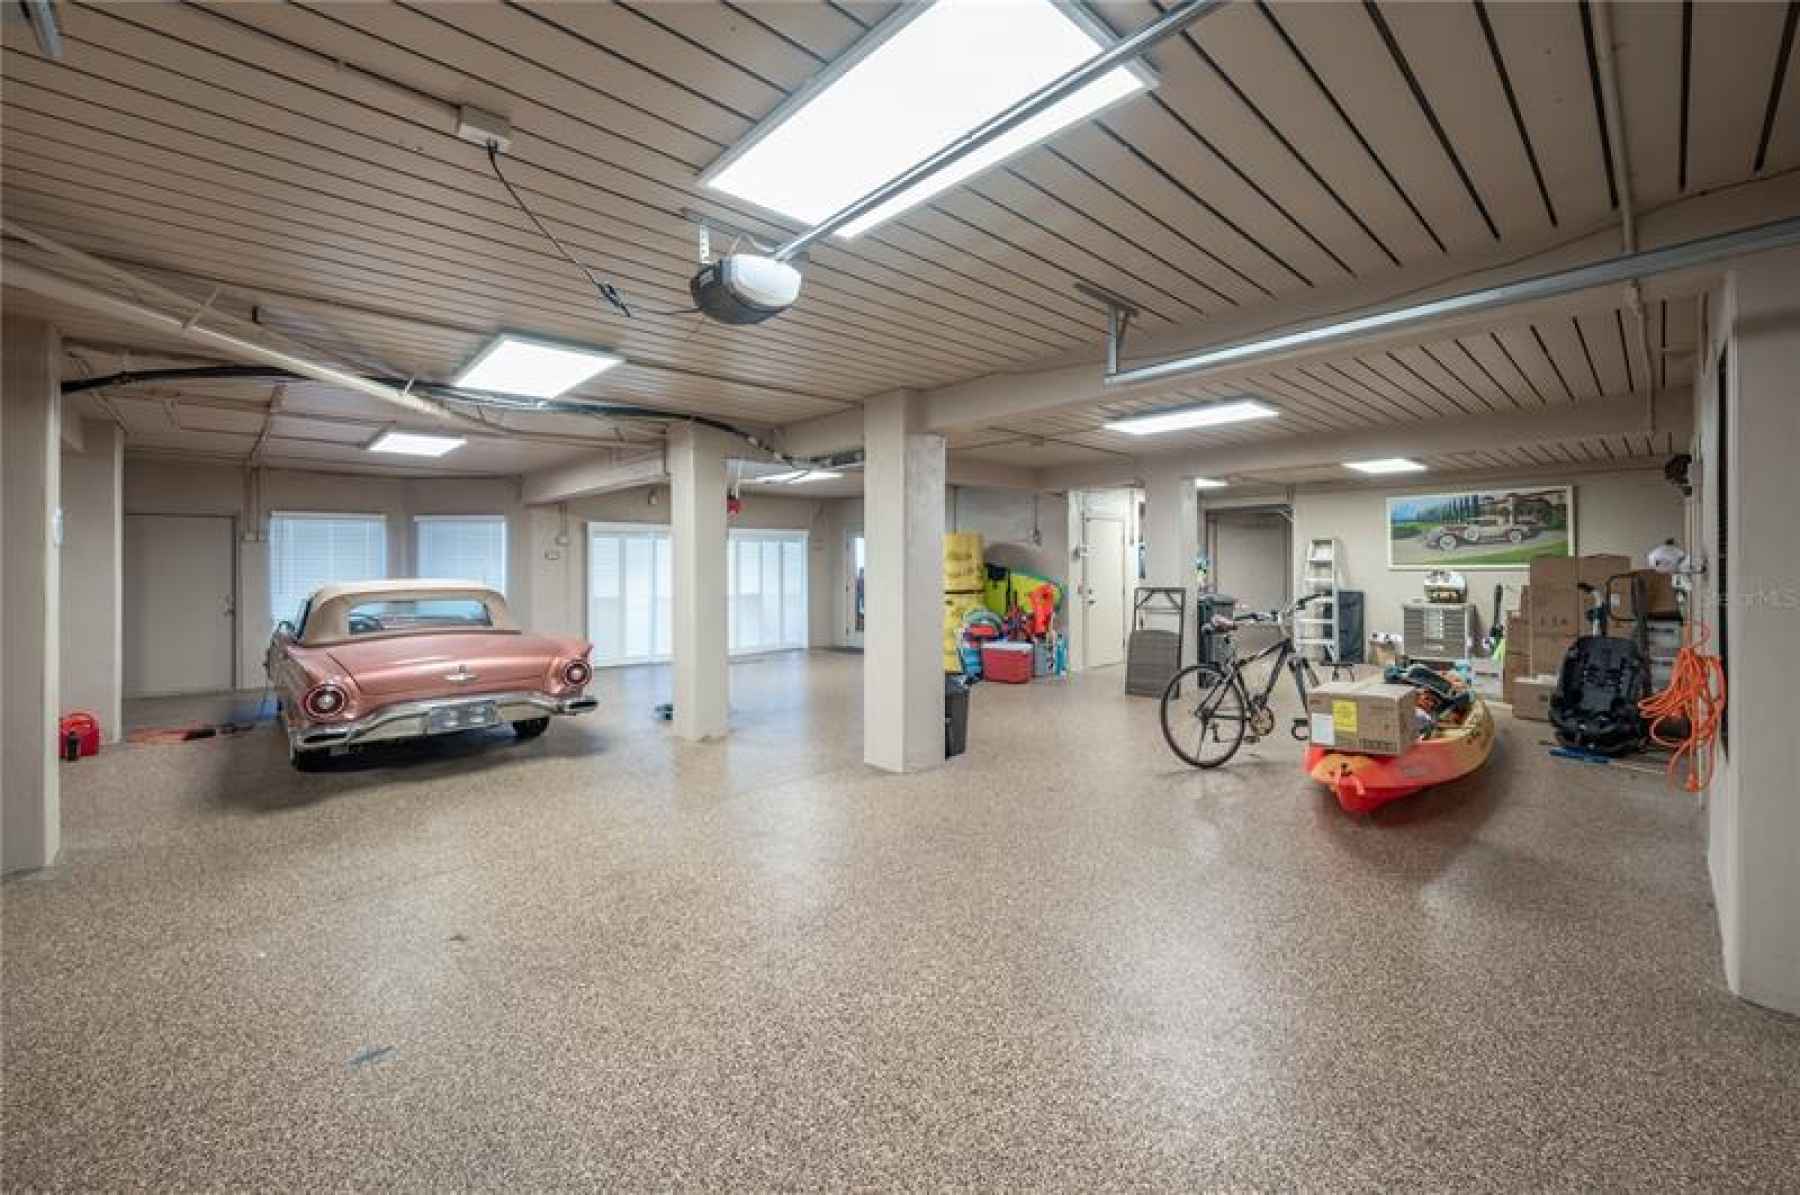 Incredible Garage Holds 7 Cars!